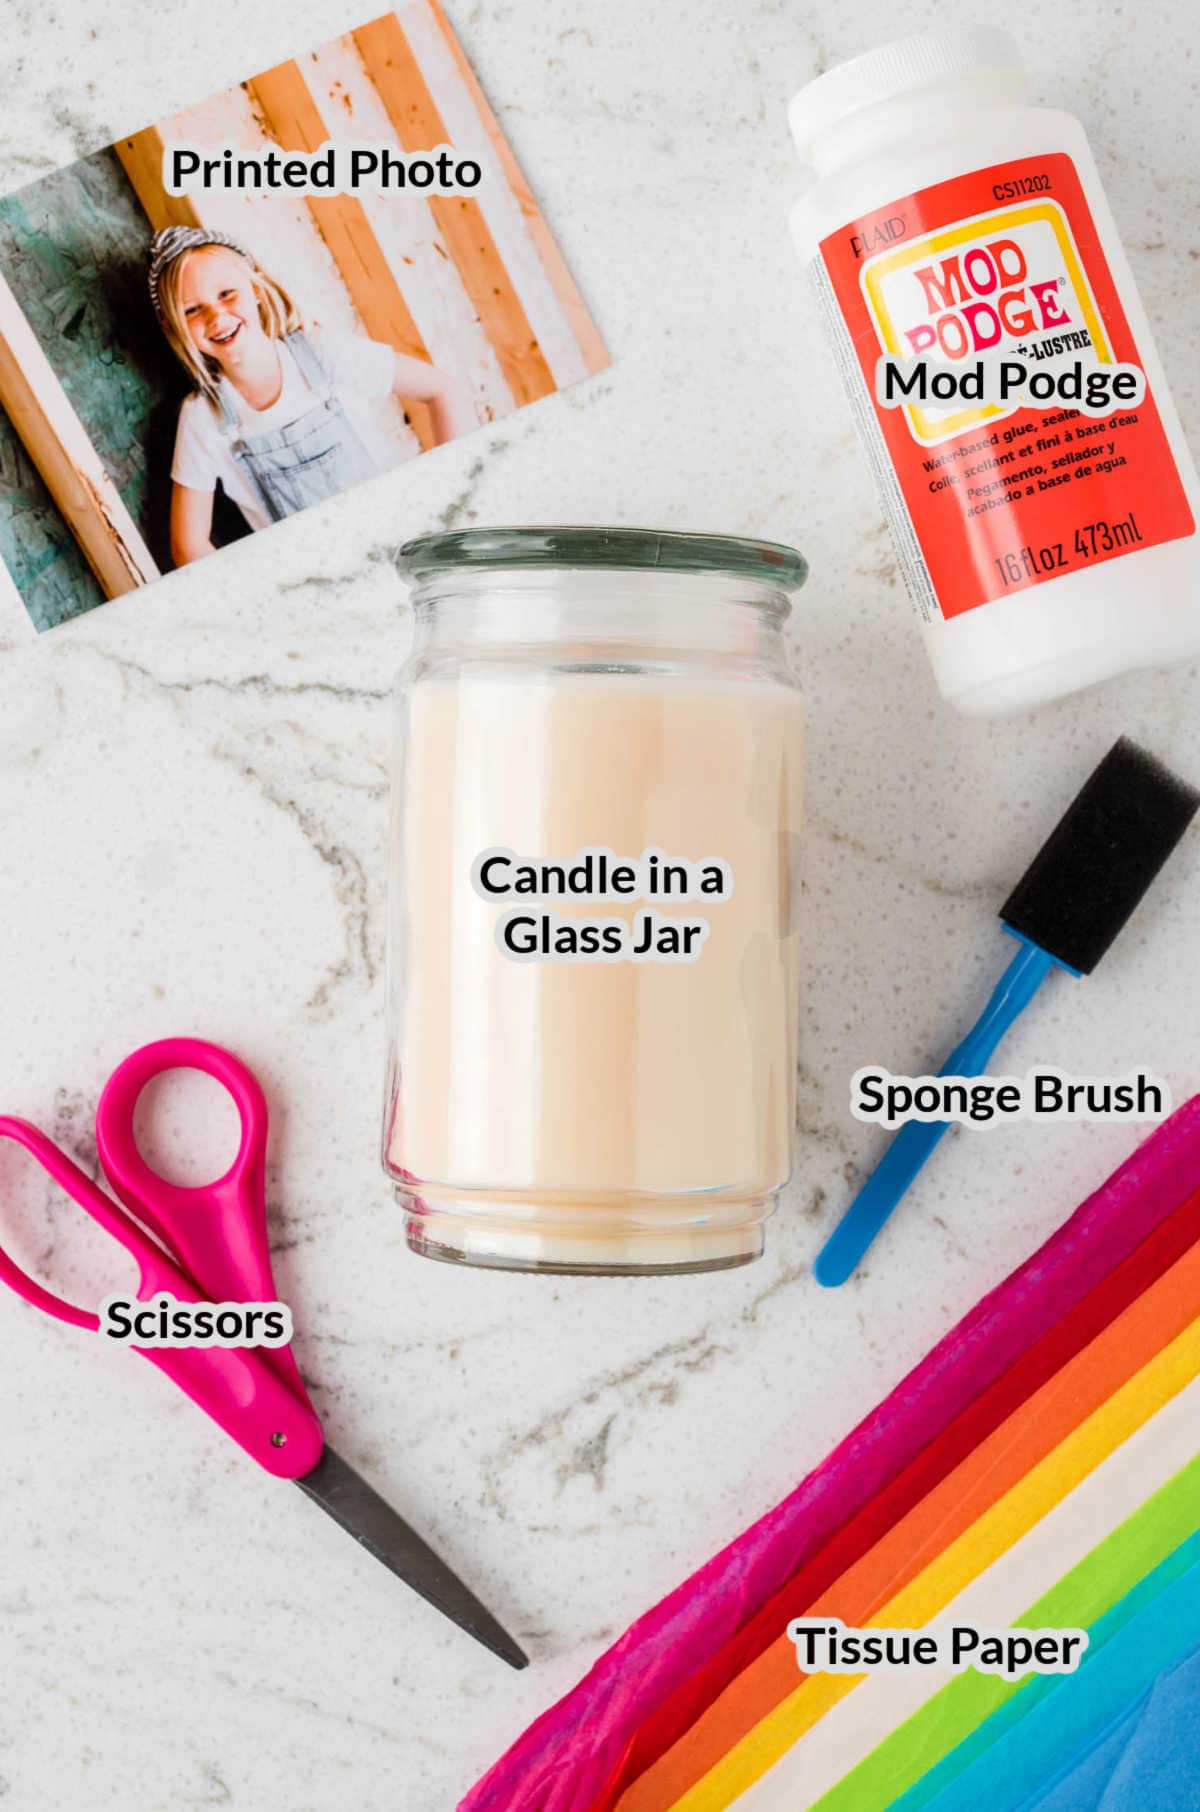 Overhead Image of the DIY Photo Candle Supplies